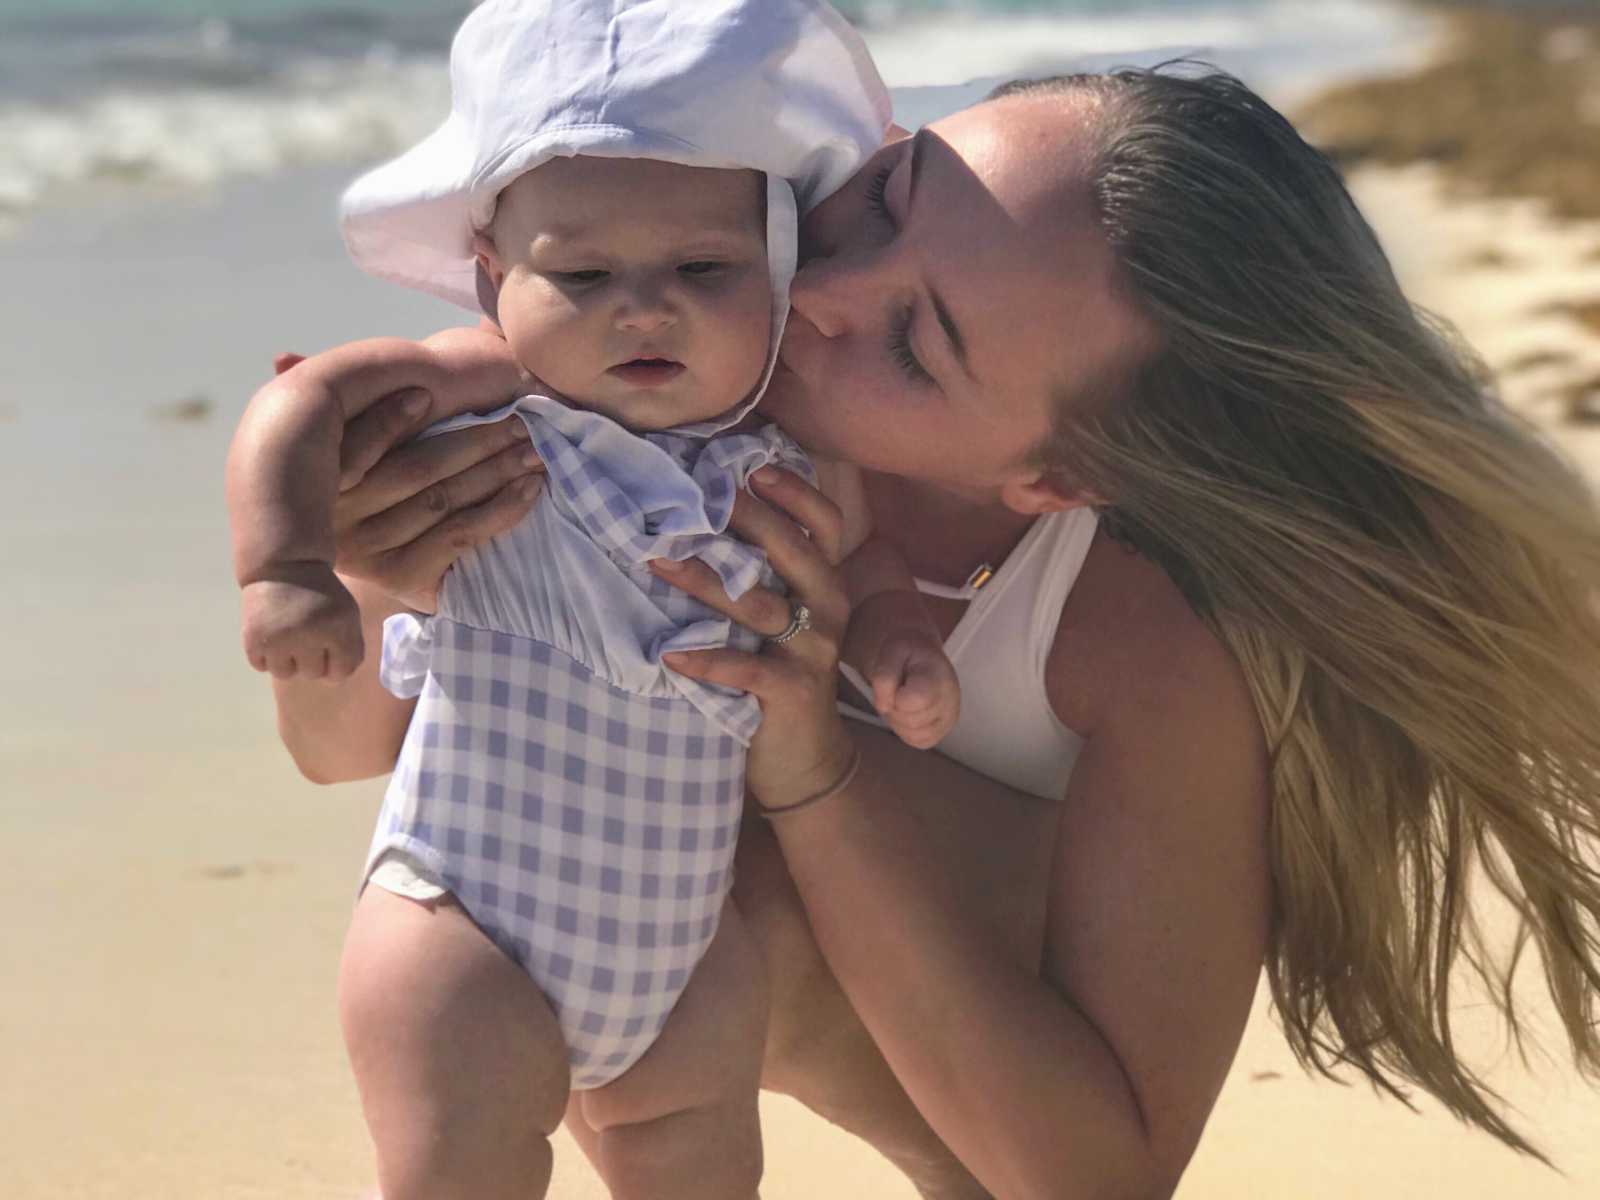 woman who struggles with postpartum thyroid condition holds up baby and kisses her cheek on beach